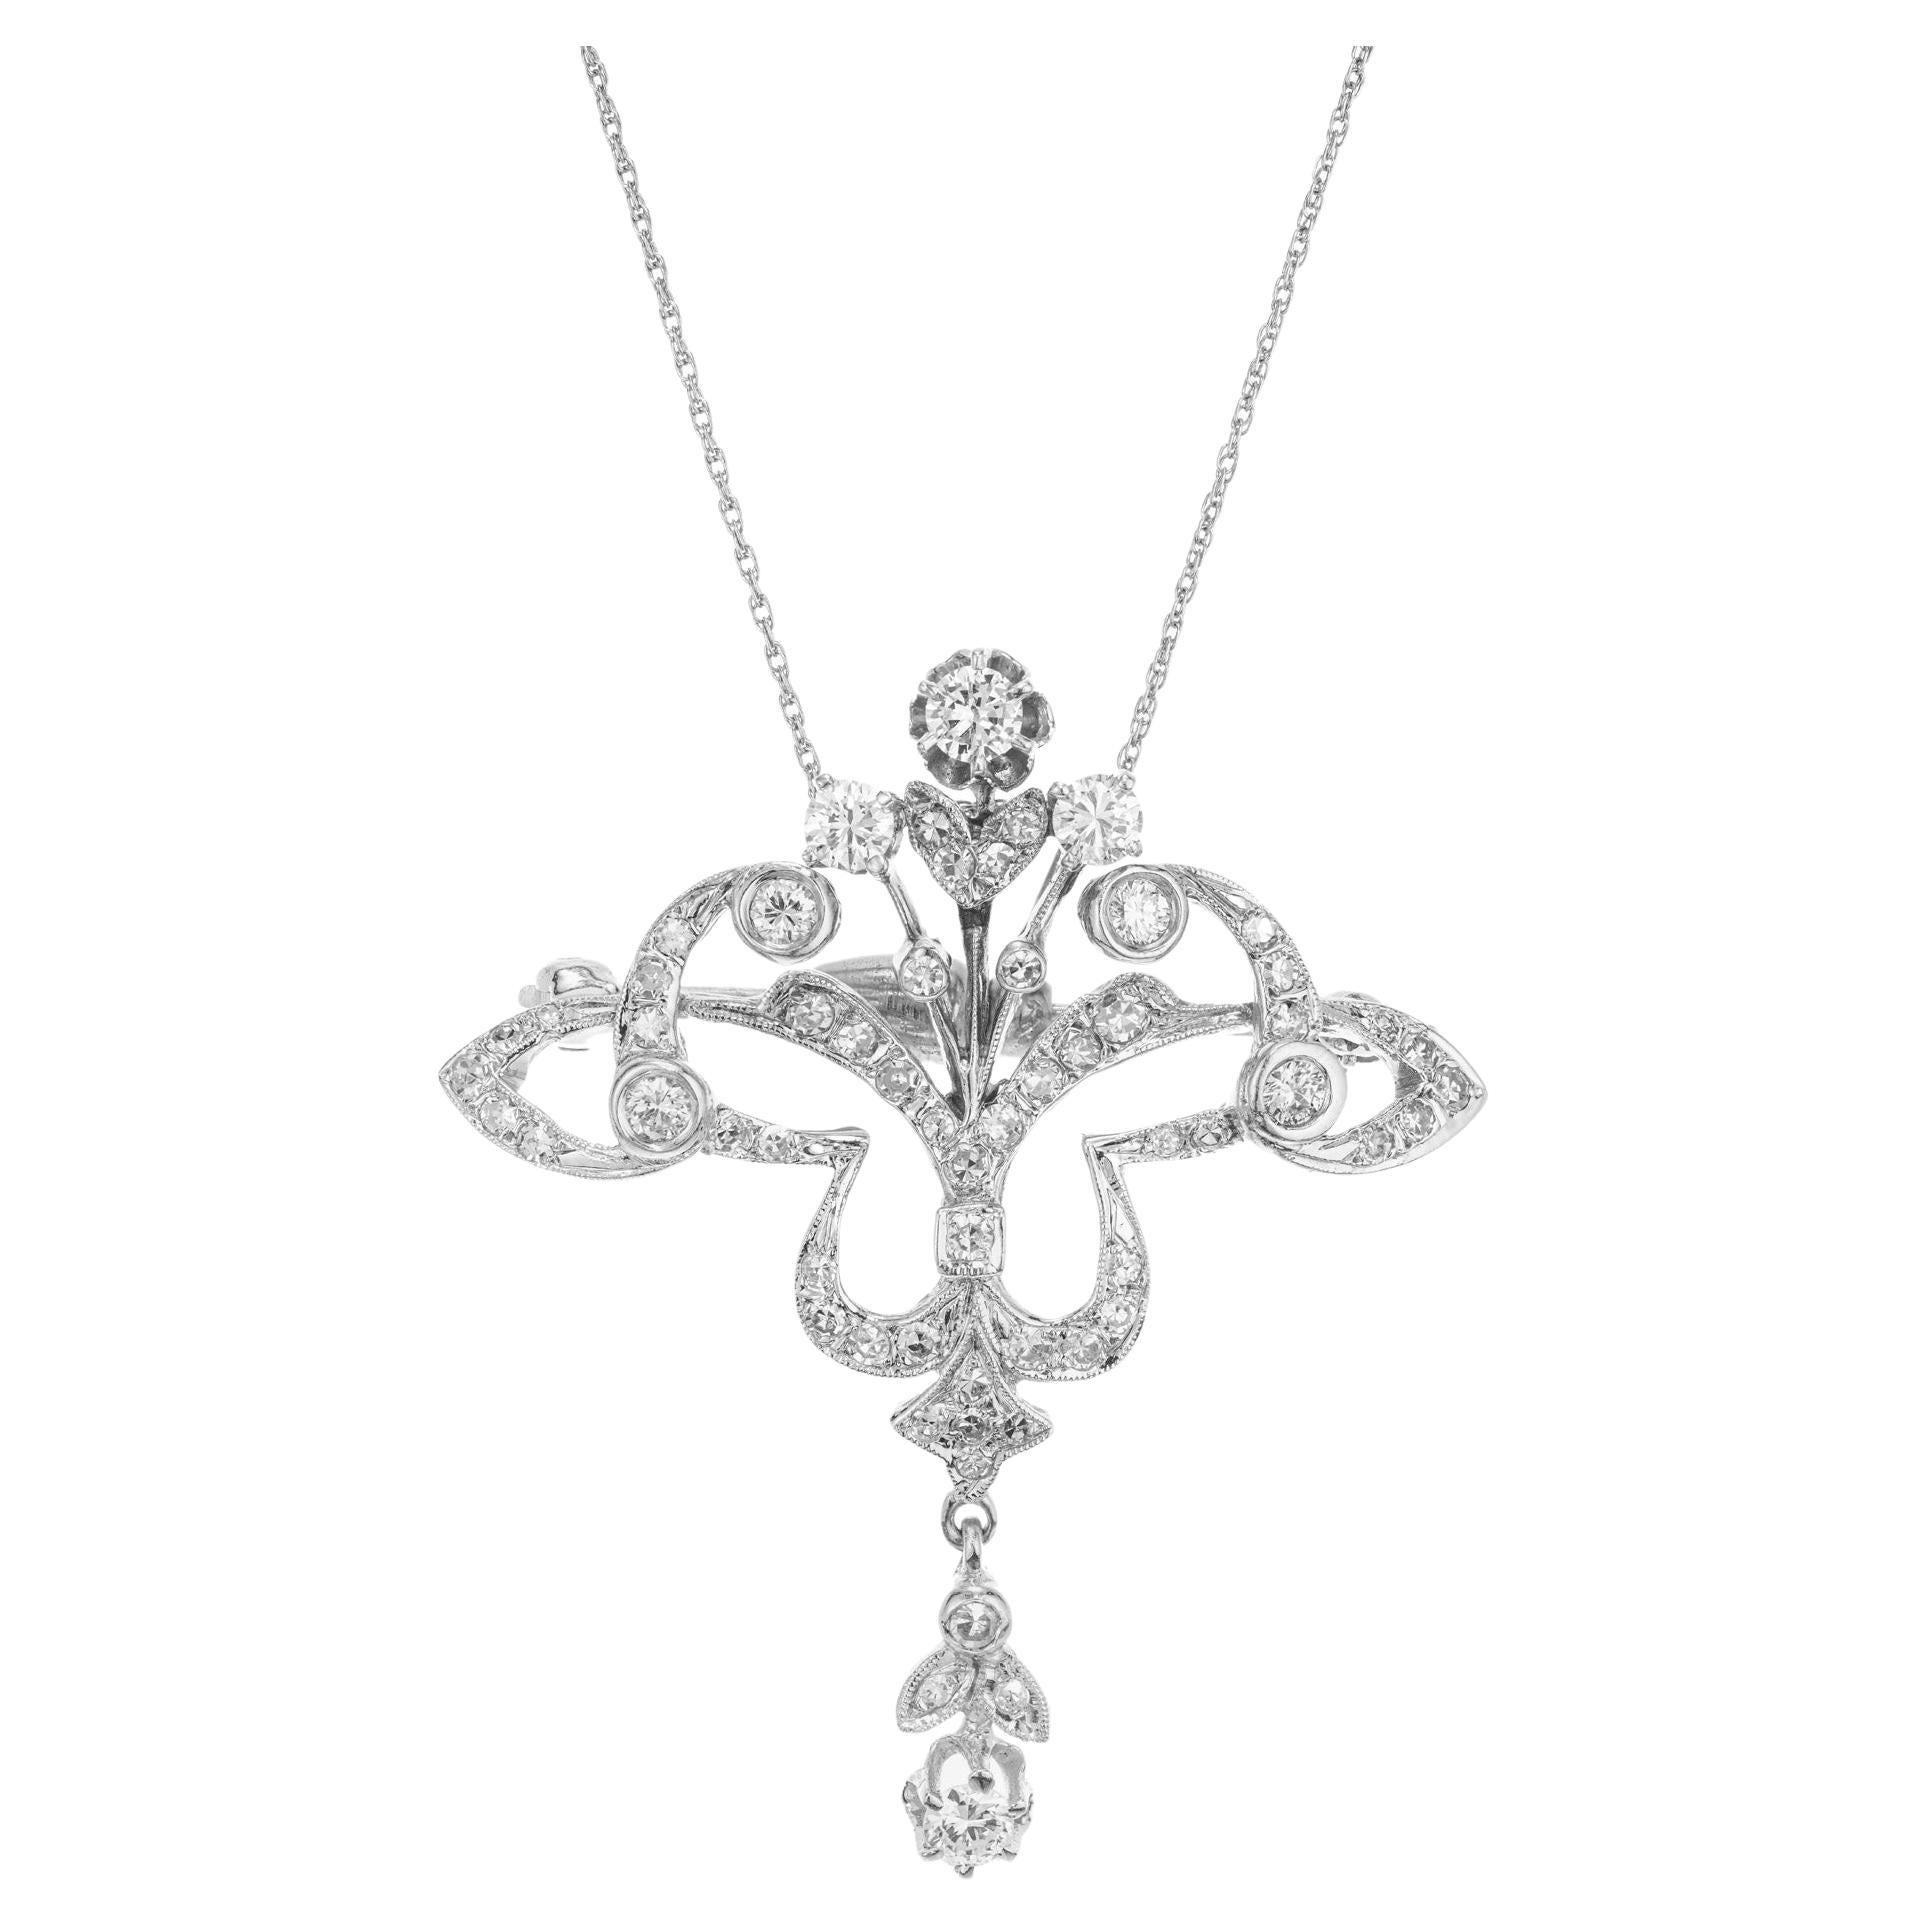 1.05 Carat Round Beaded Diamond White Gold Open Work Brooch Pendant Necklace For Sale